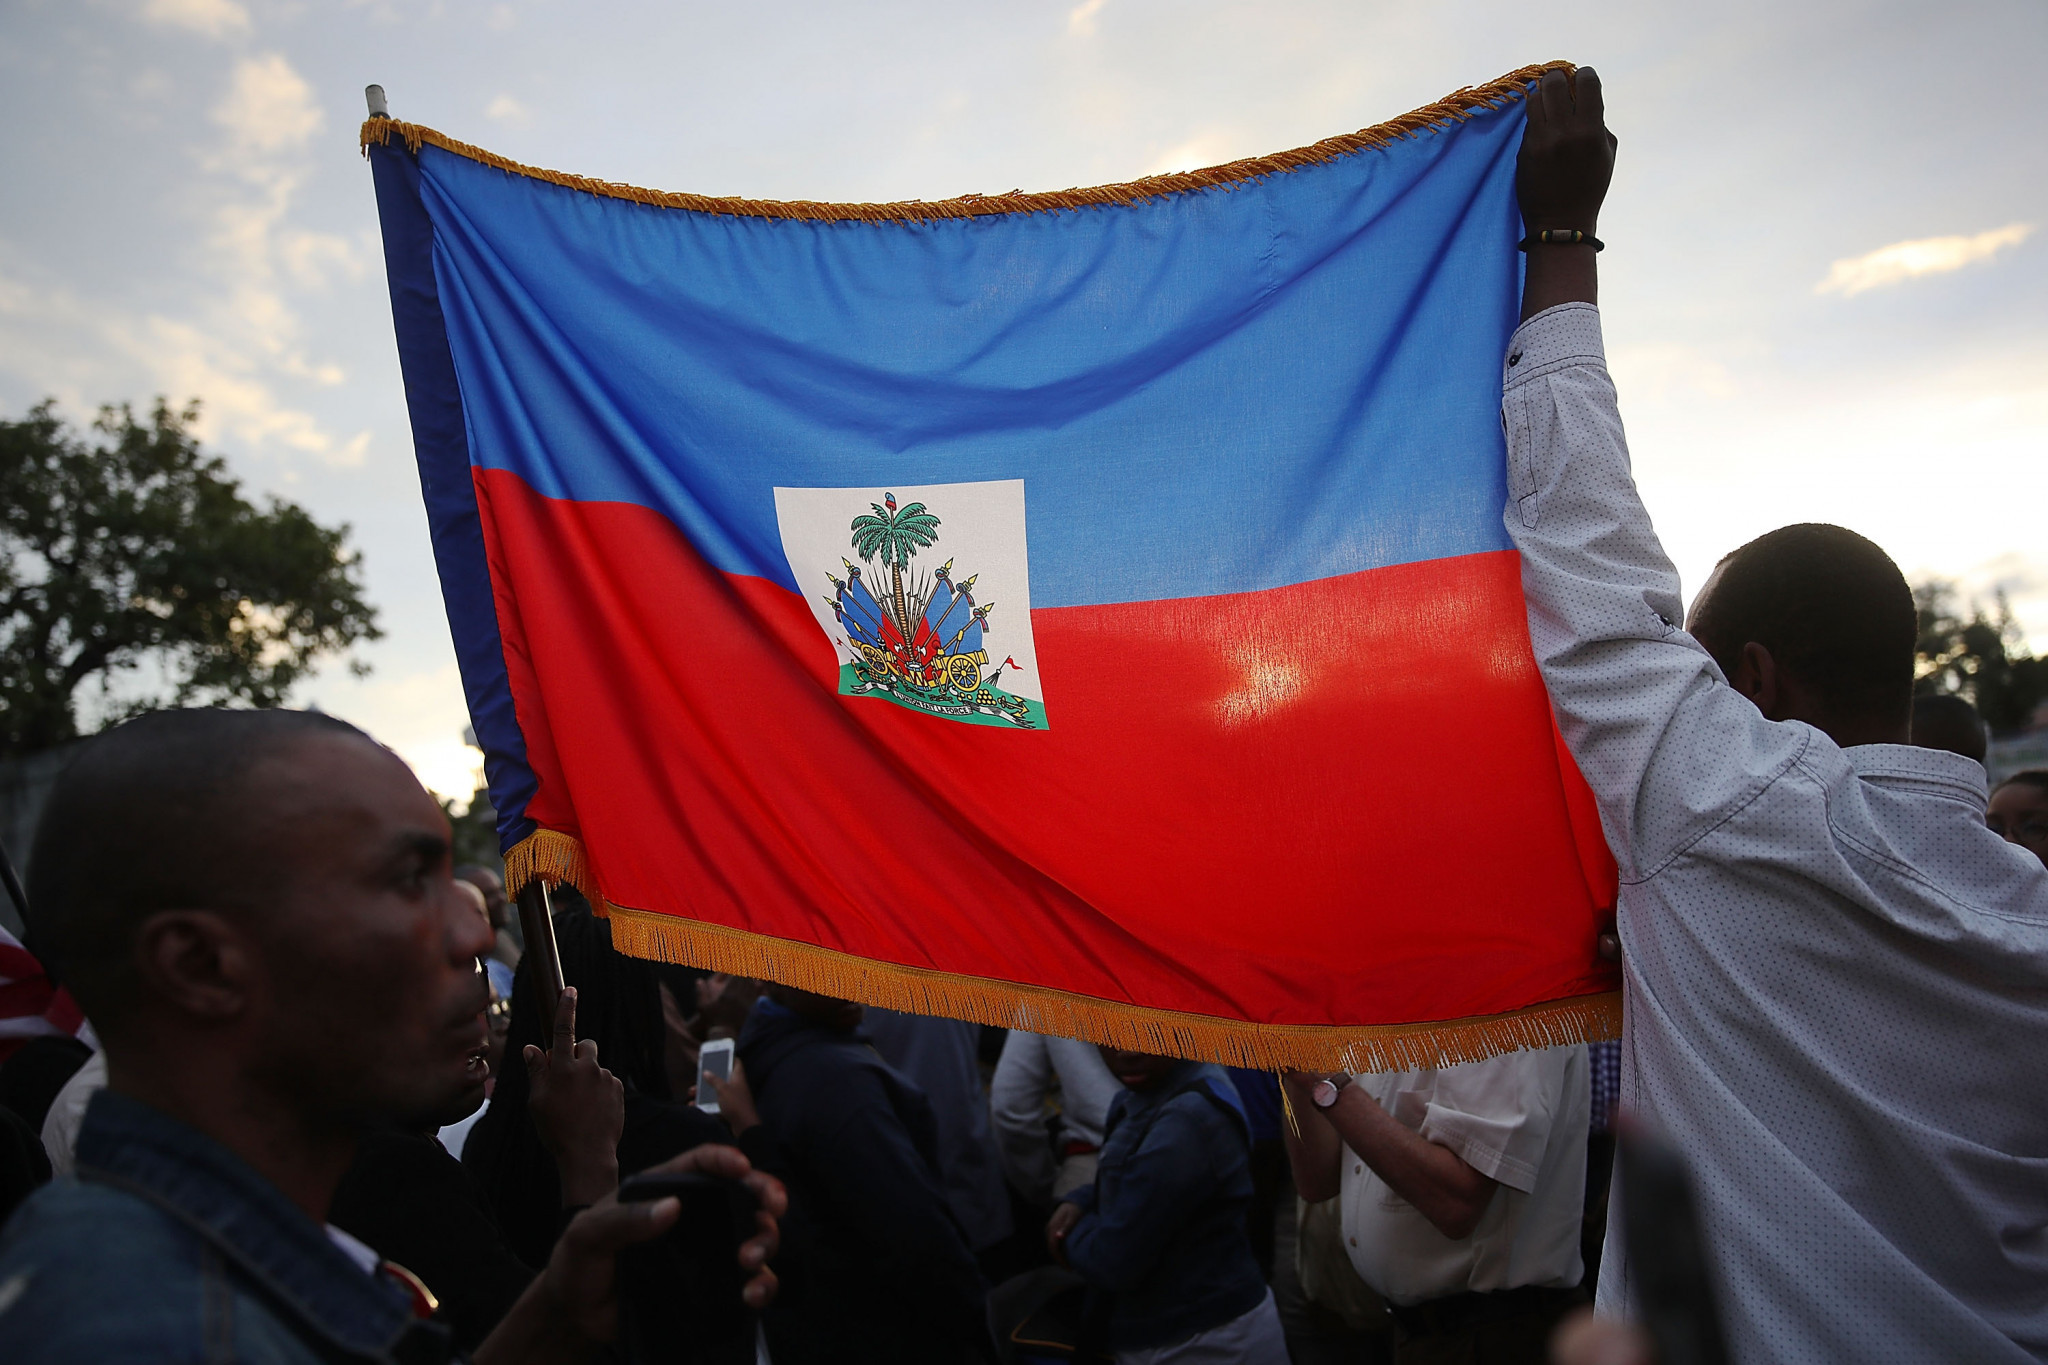 Haiti is to compete at the FISU Winter World University Games for the first time ©Getty Images